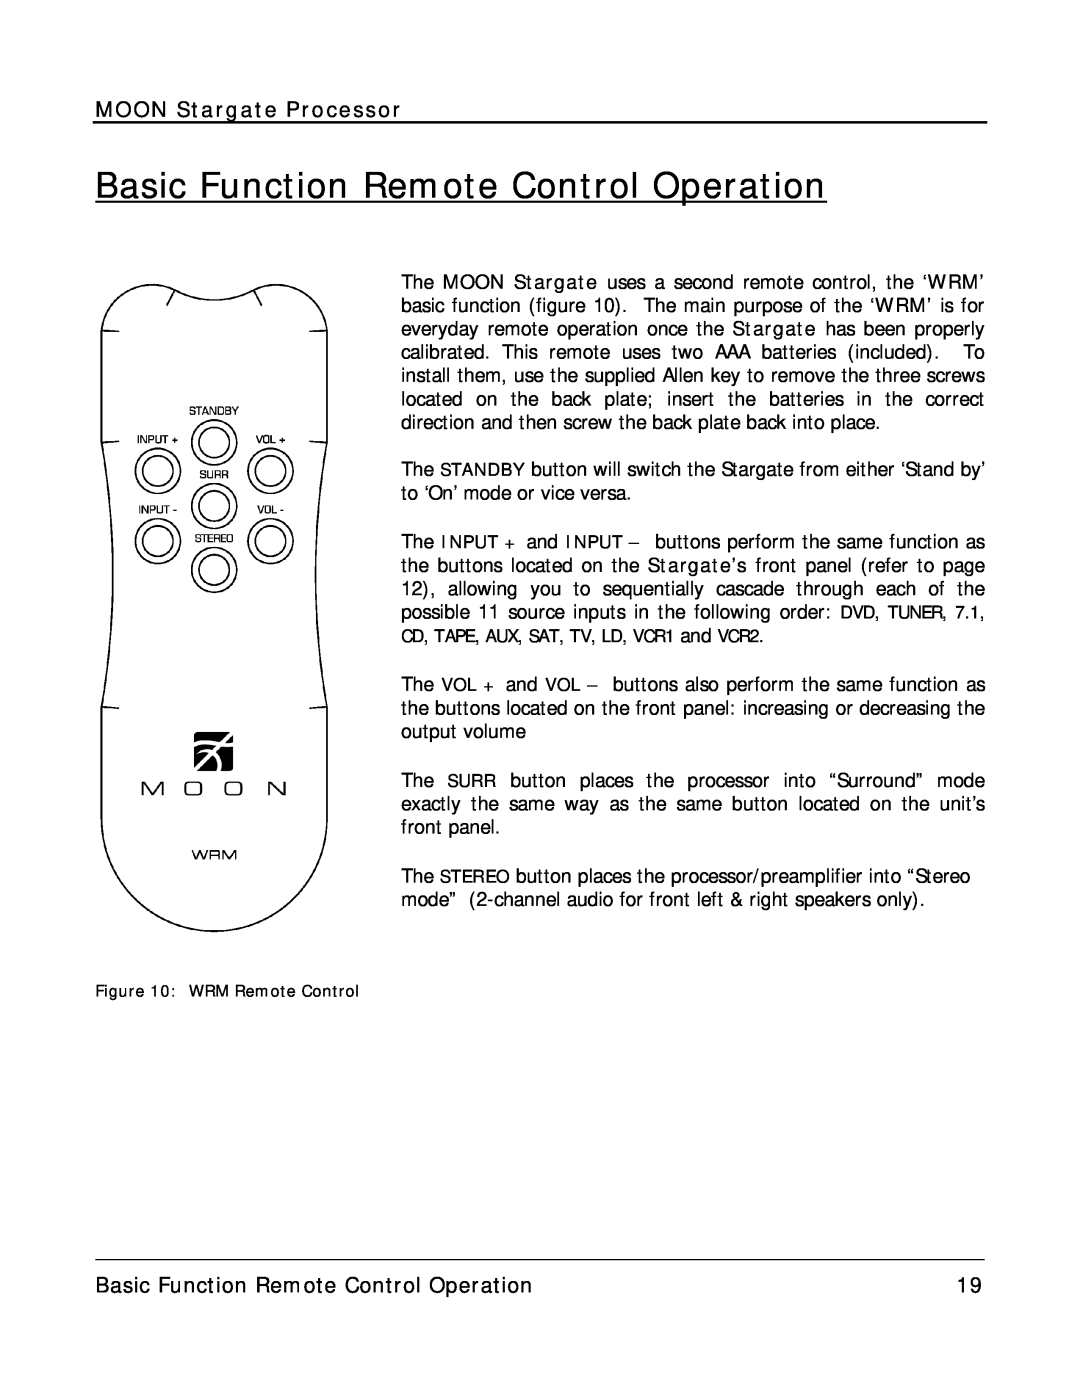 Simaudio Preamplifier and D/A converter owner manual Basic Function Remote Control Operation, MOON Stargate Processor 